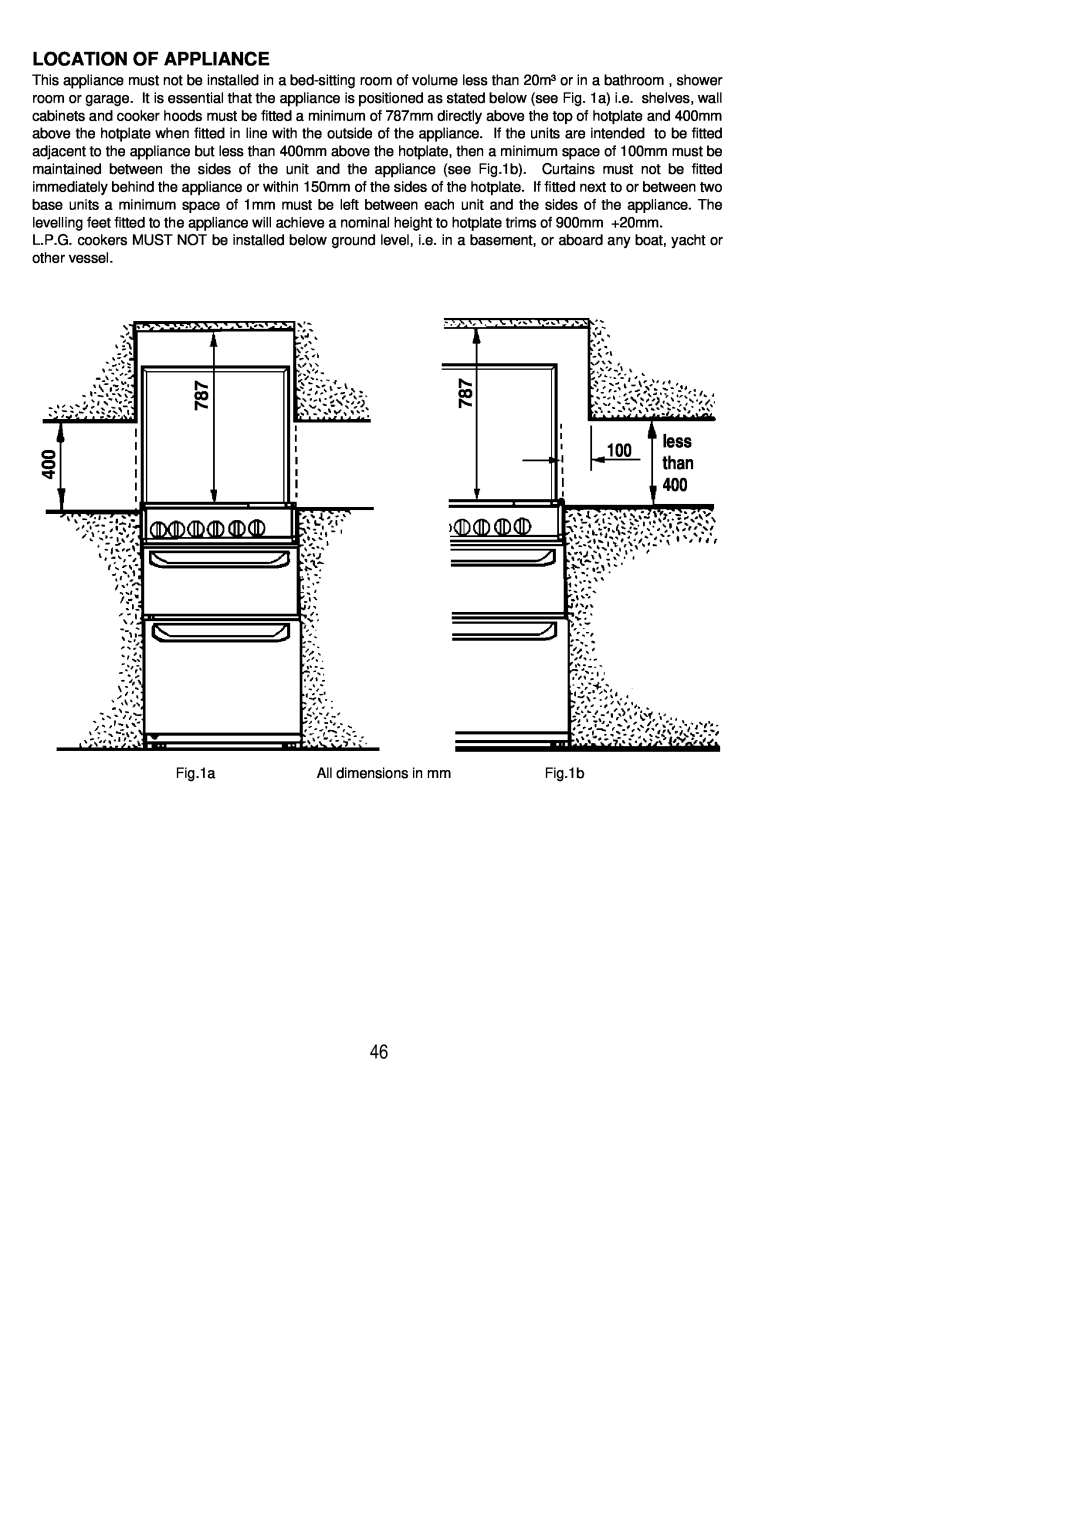 Electrolux SIG 556 installation instructions Location Of Appliance, less than 400, All dimensions in mm, b 